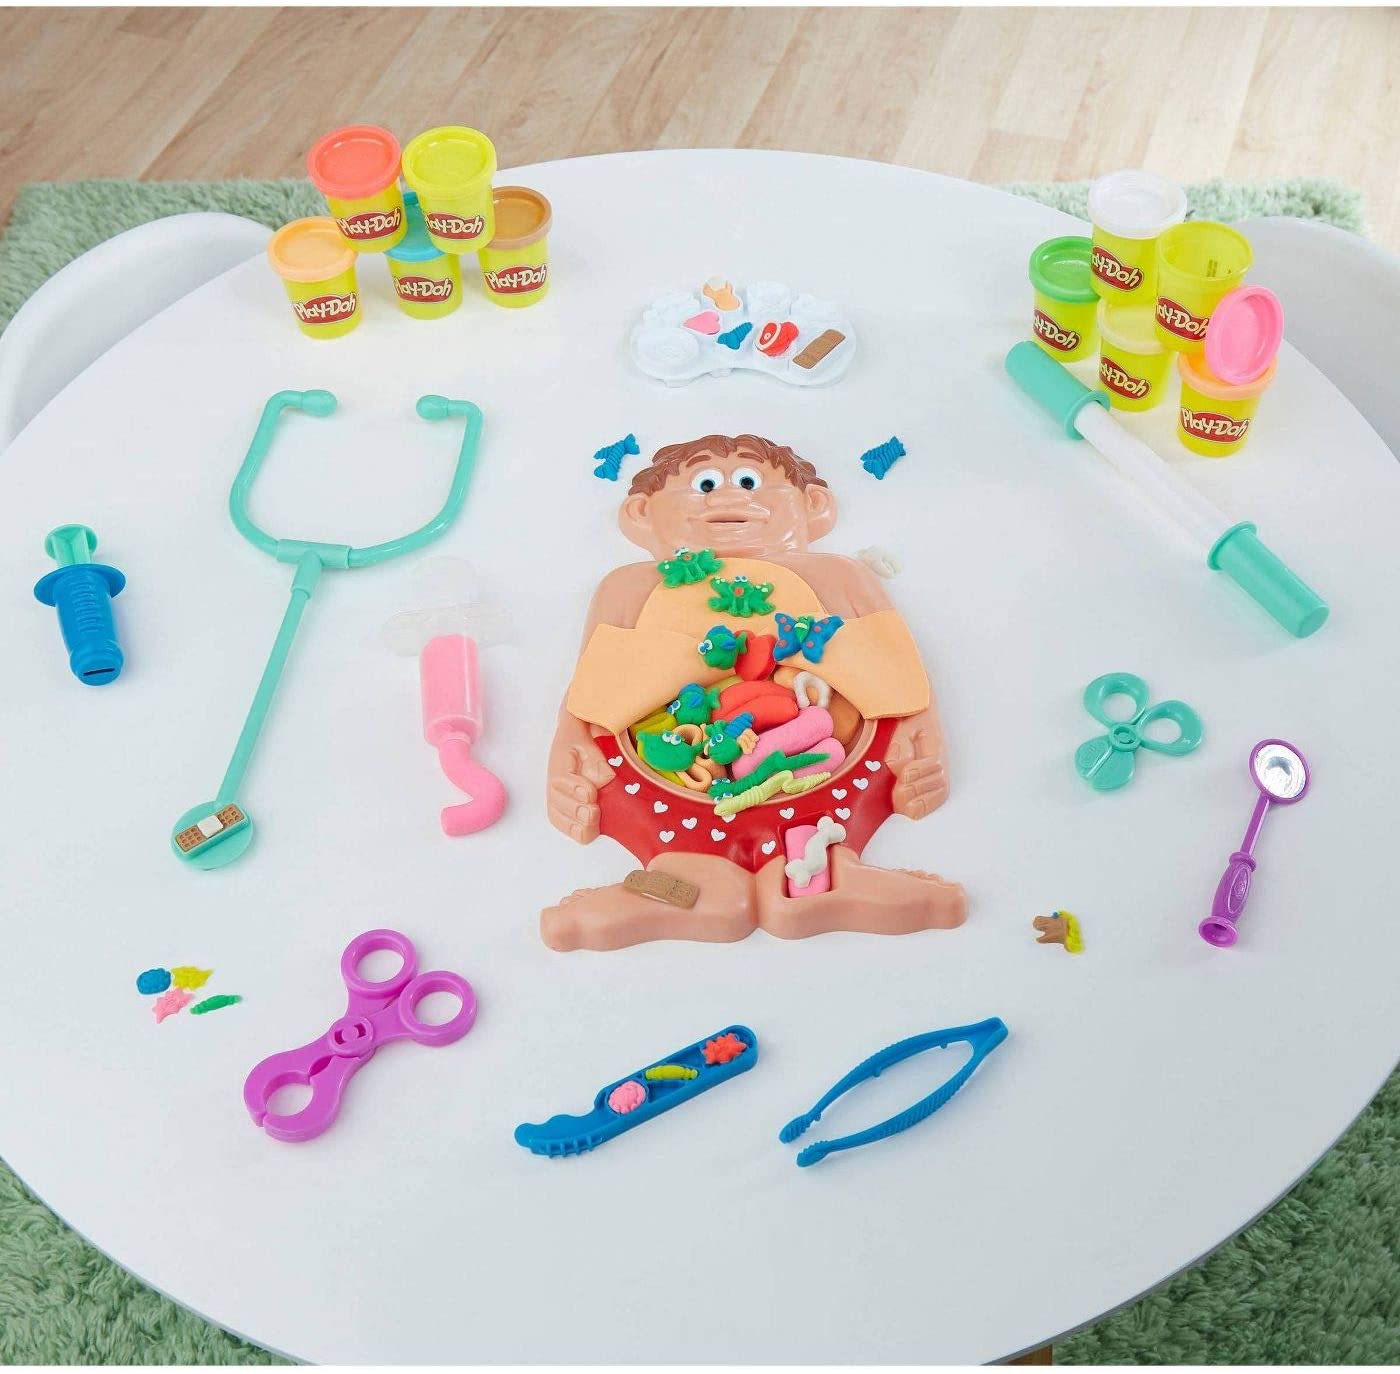 Play-Doh Operation Classic Clinic